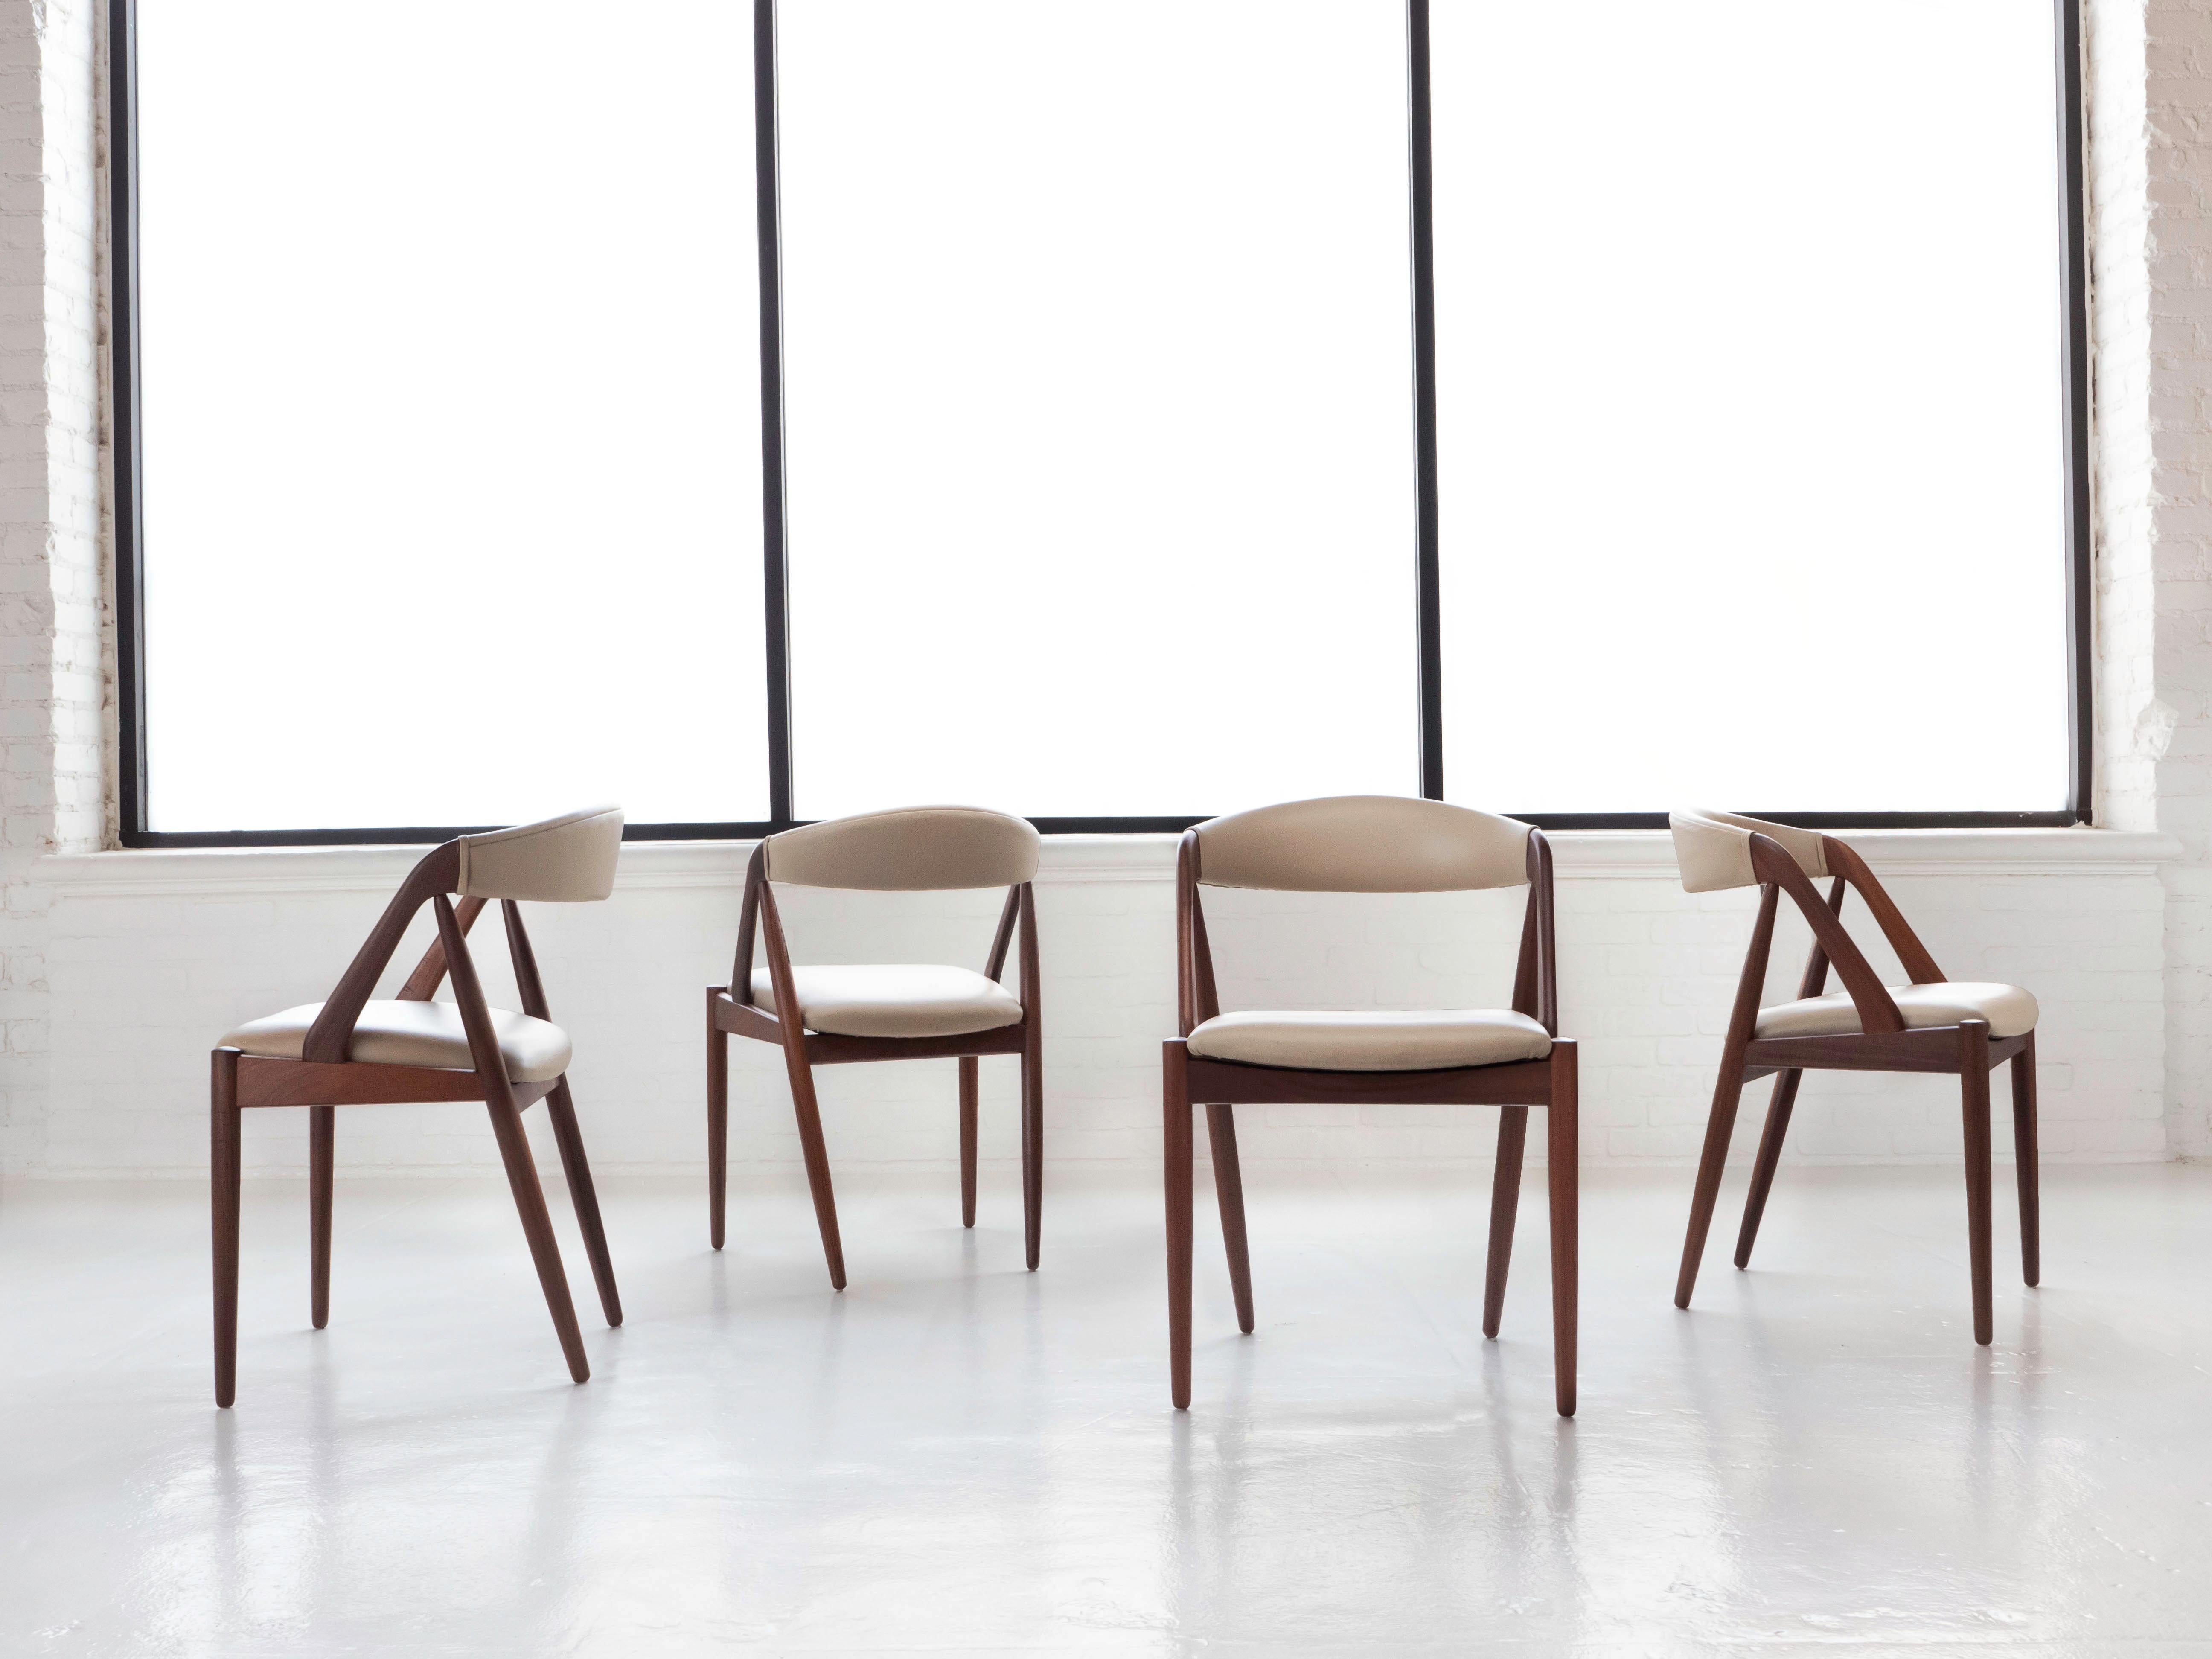 A set of 4 dining chairs by Danish designer Kai Kristiansen, Schou Andersen circa 1960’s. Known as his Model 31 dining chairs, these sculpted chairs each boast a solid teak frame, sleek lines, tapered legs, and a curved back support. 

The chairs